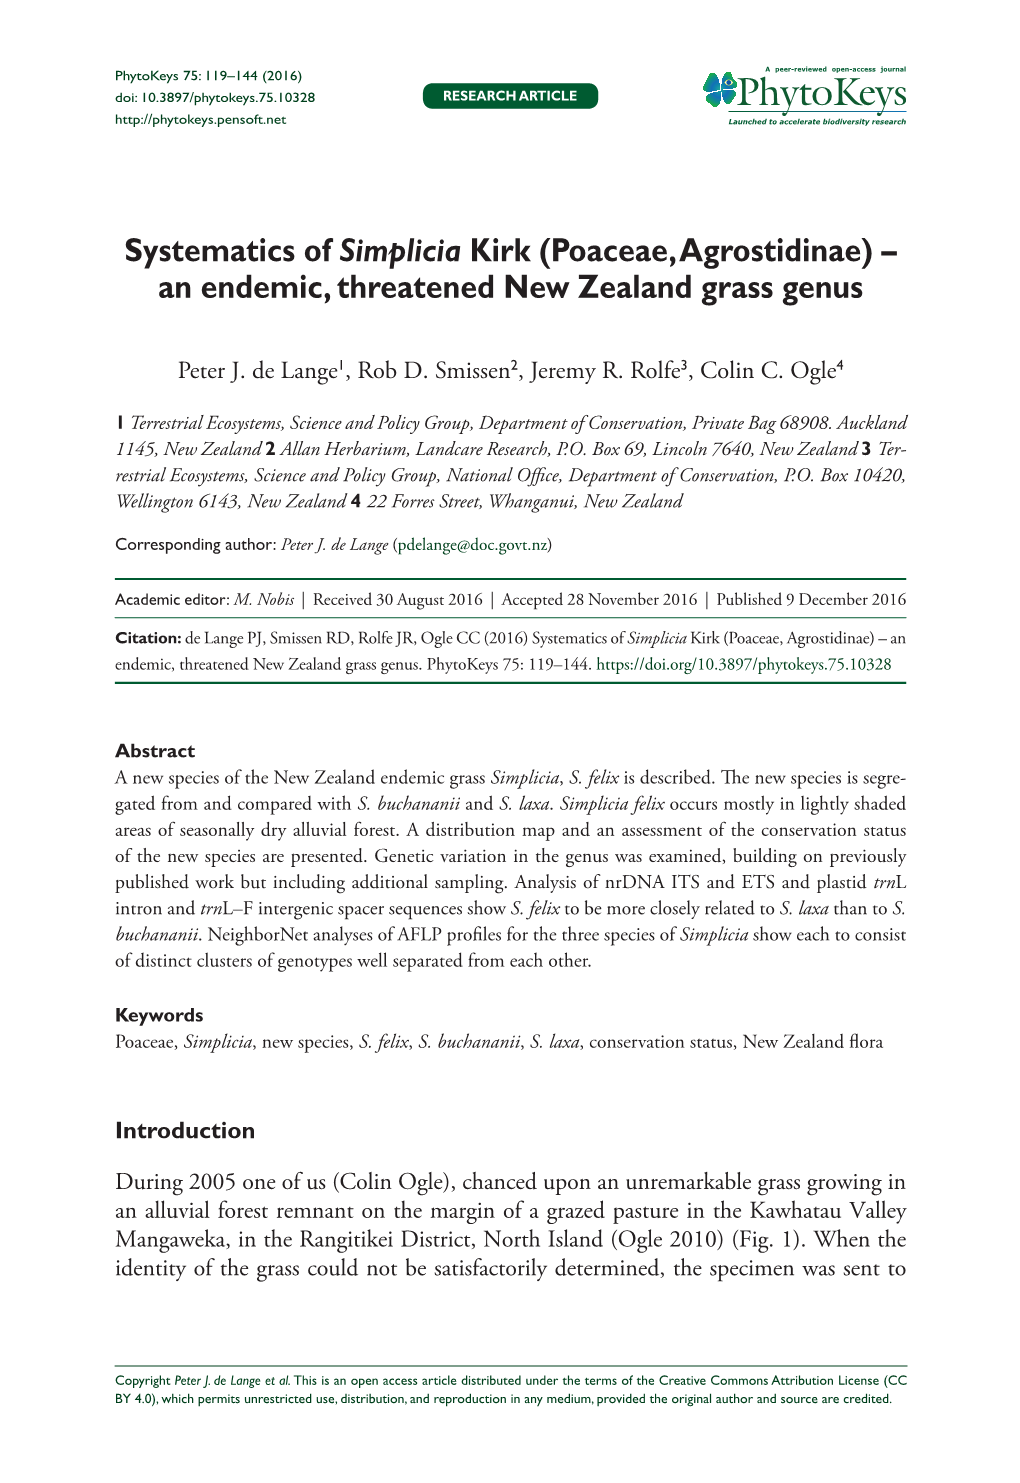 Systematics of Simplicia Kirk (Poaceae, Agrostidinae) – an Endemic, Threatened New Zealand Grass Genus